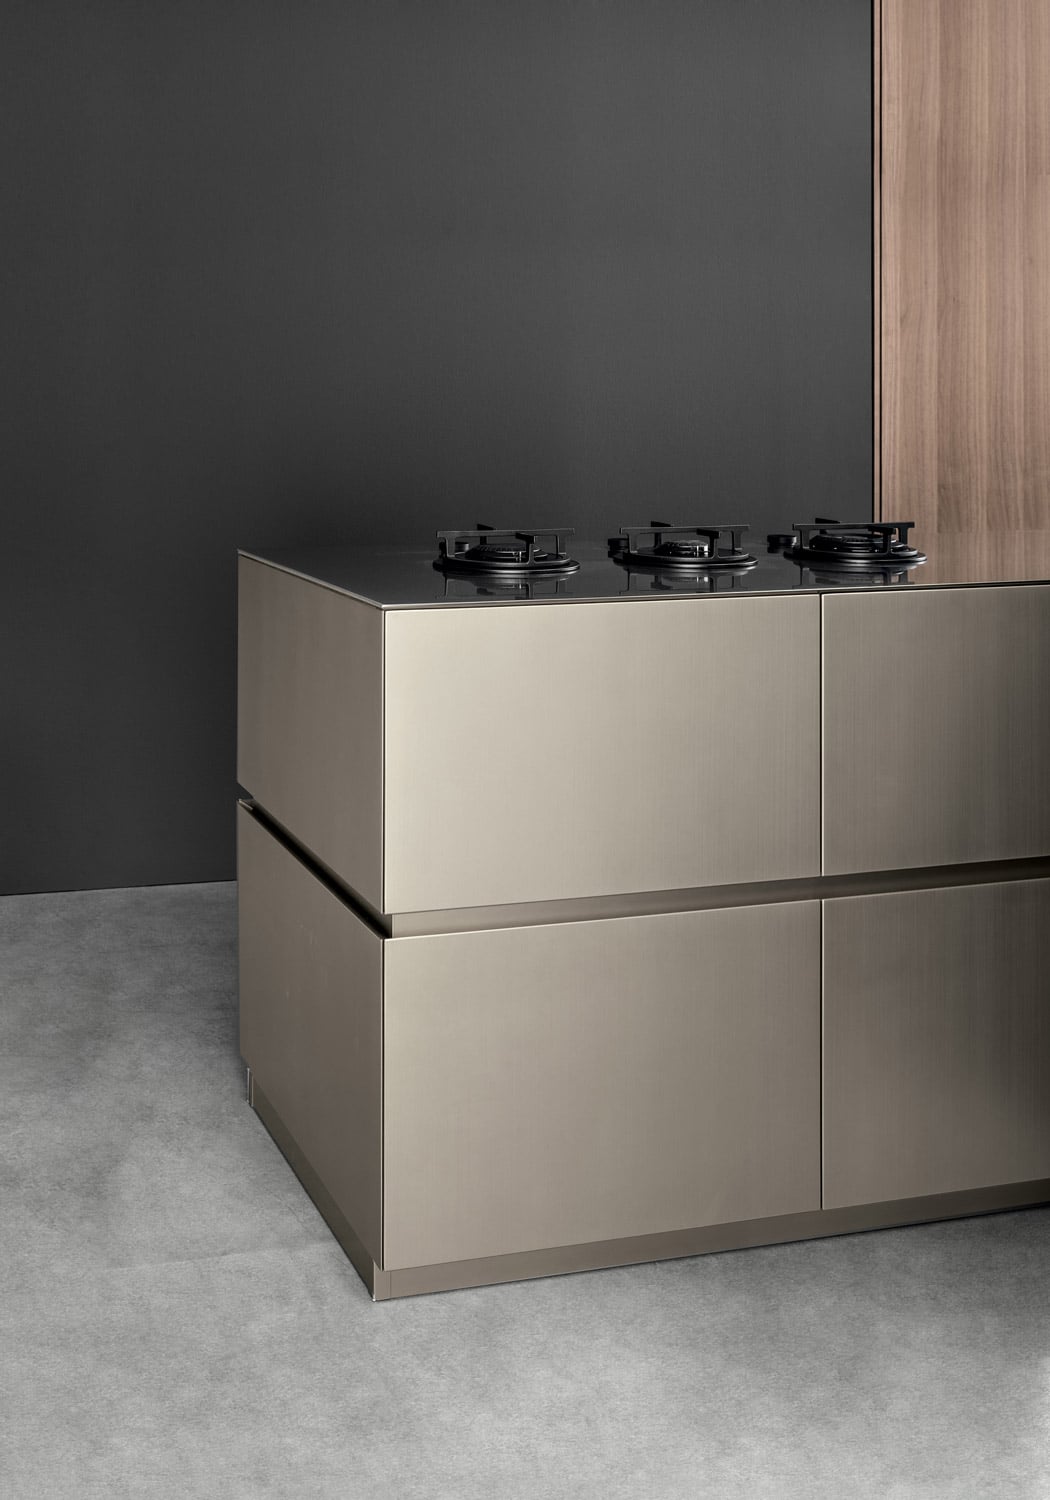 The uninterrupted channel along the perimeter of the island is a contemporary detail enhanced by the use of the same finish on cabinets, channel, and toe kick.